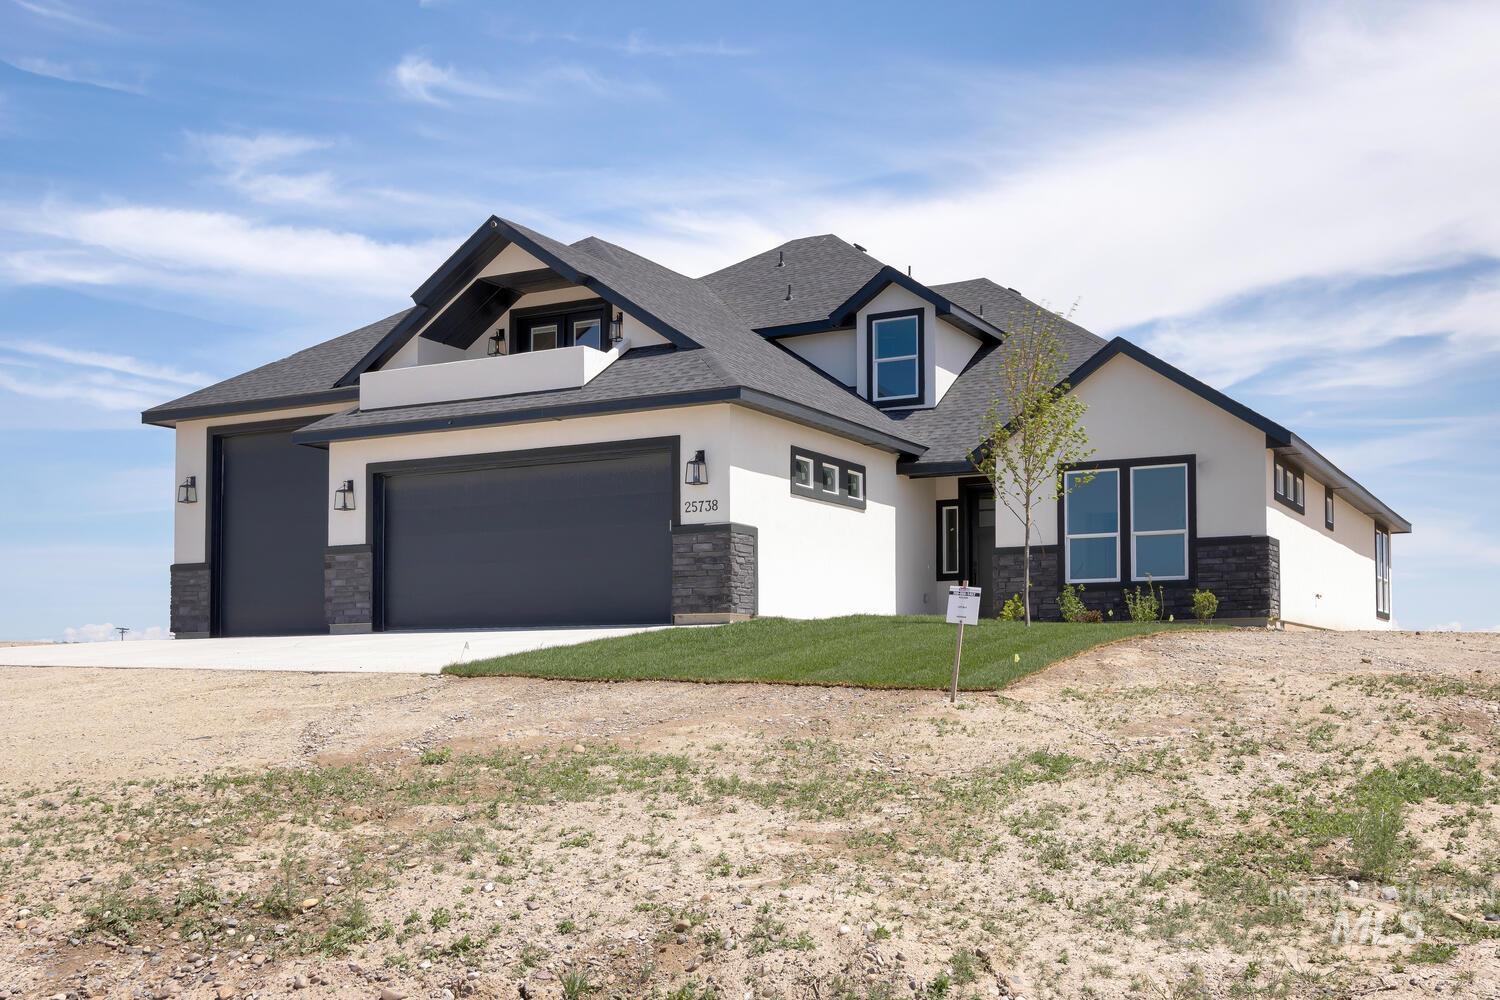 25738 Clydesdale Lane, Parma, Idaho 83660-0000, 4 Bedrooms, 2.5 Bathrooms, Residential For Sale, Price $899,900, 98868669